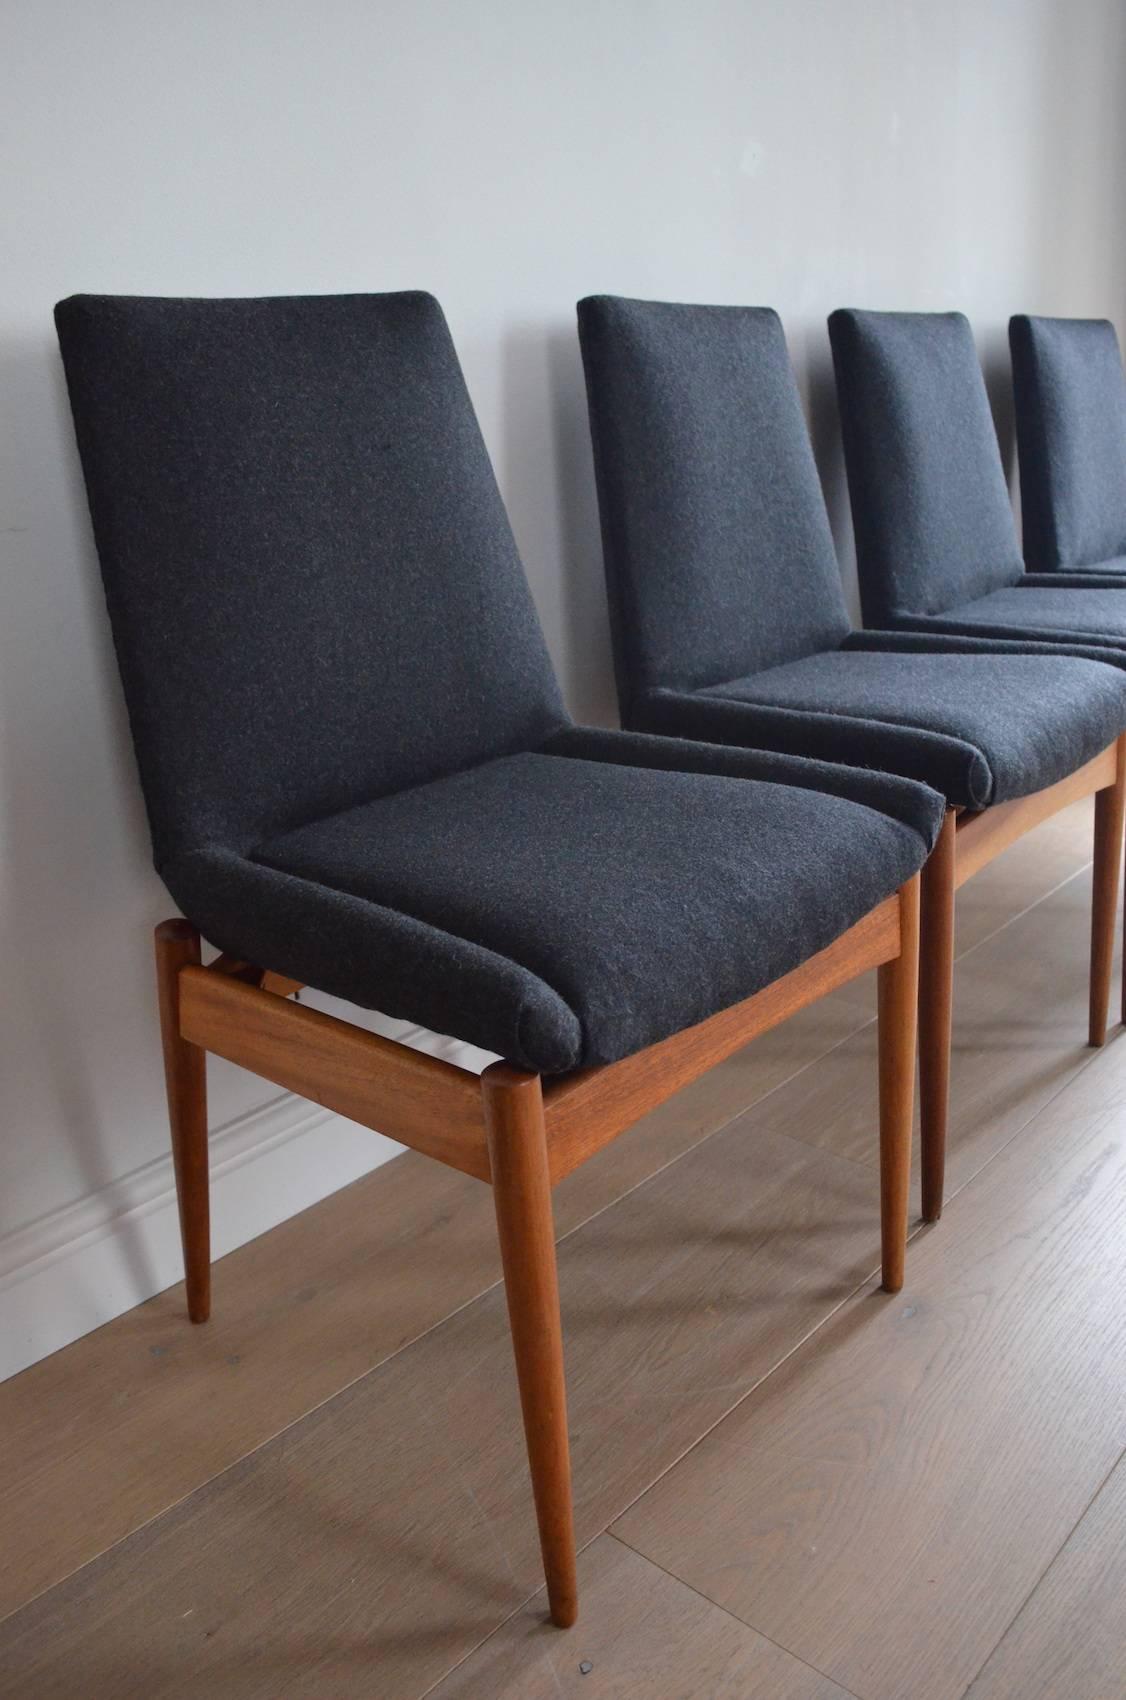 A set of four extremely comfortable Robert Heritage for Archie Shine 1960s 'Hamilton' dining chairs.

Robert Heritage was one of the most successful British furniture designers of the mid-20th century. He went on to teach following generations as